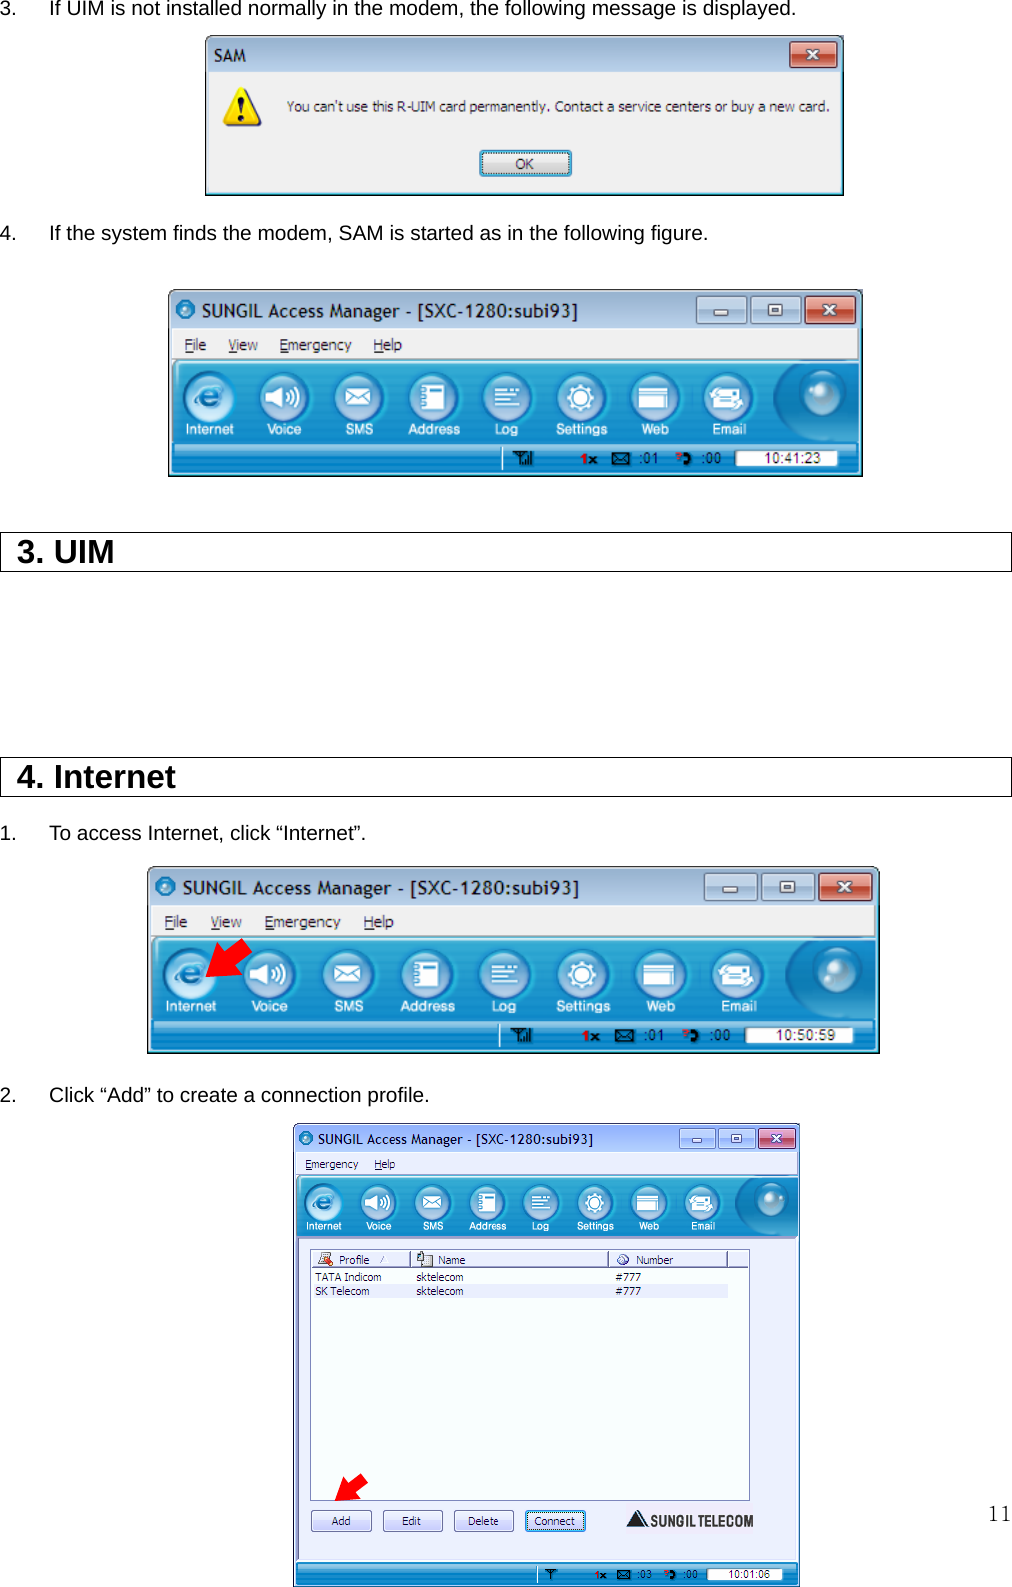  113.  If UIM is not installed normally in the modem, the following message is displayed.      4.    If the system finds the modem, SAM is started as in the following figure.         3. UIM                                                 4. Internet                                          1.    To access Internet, click “Internet”.       2.    Click “Add” to create a connection profile.           